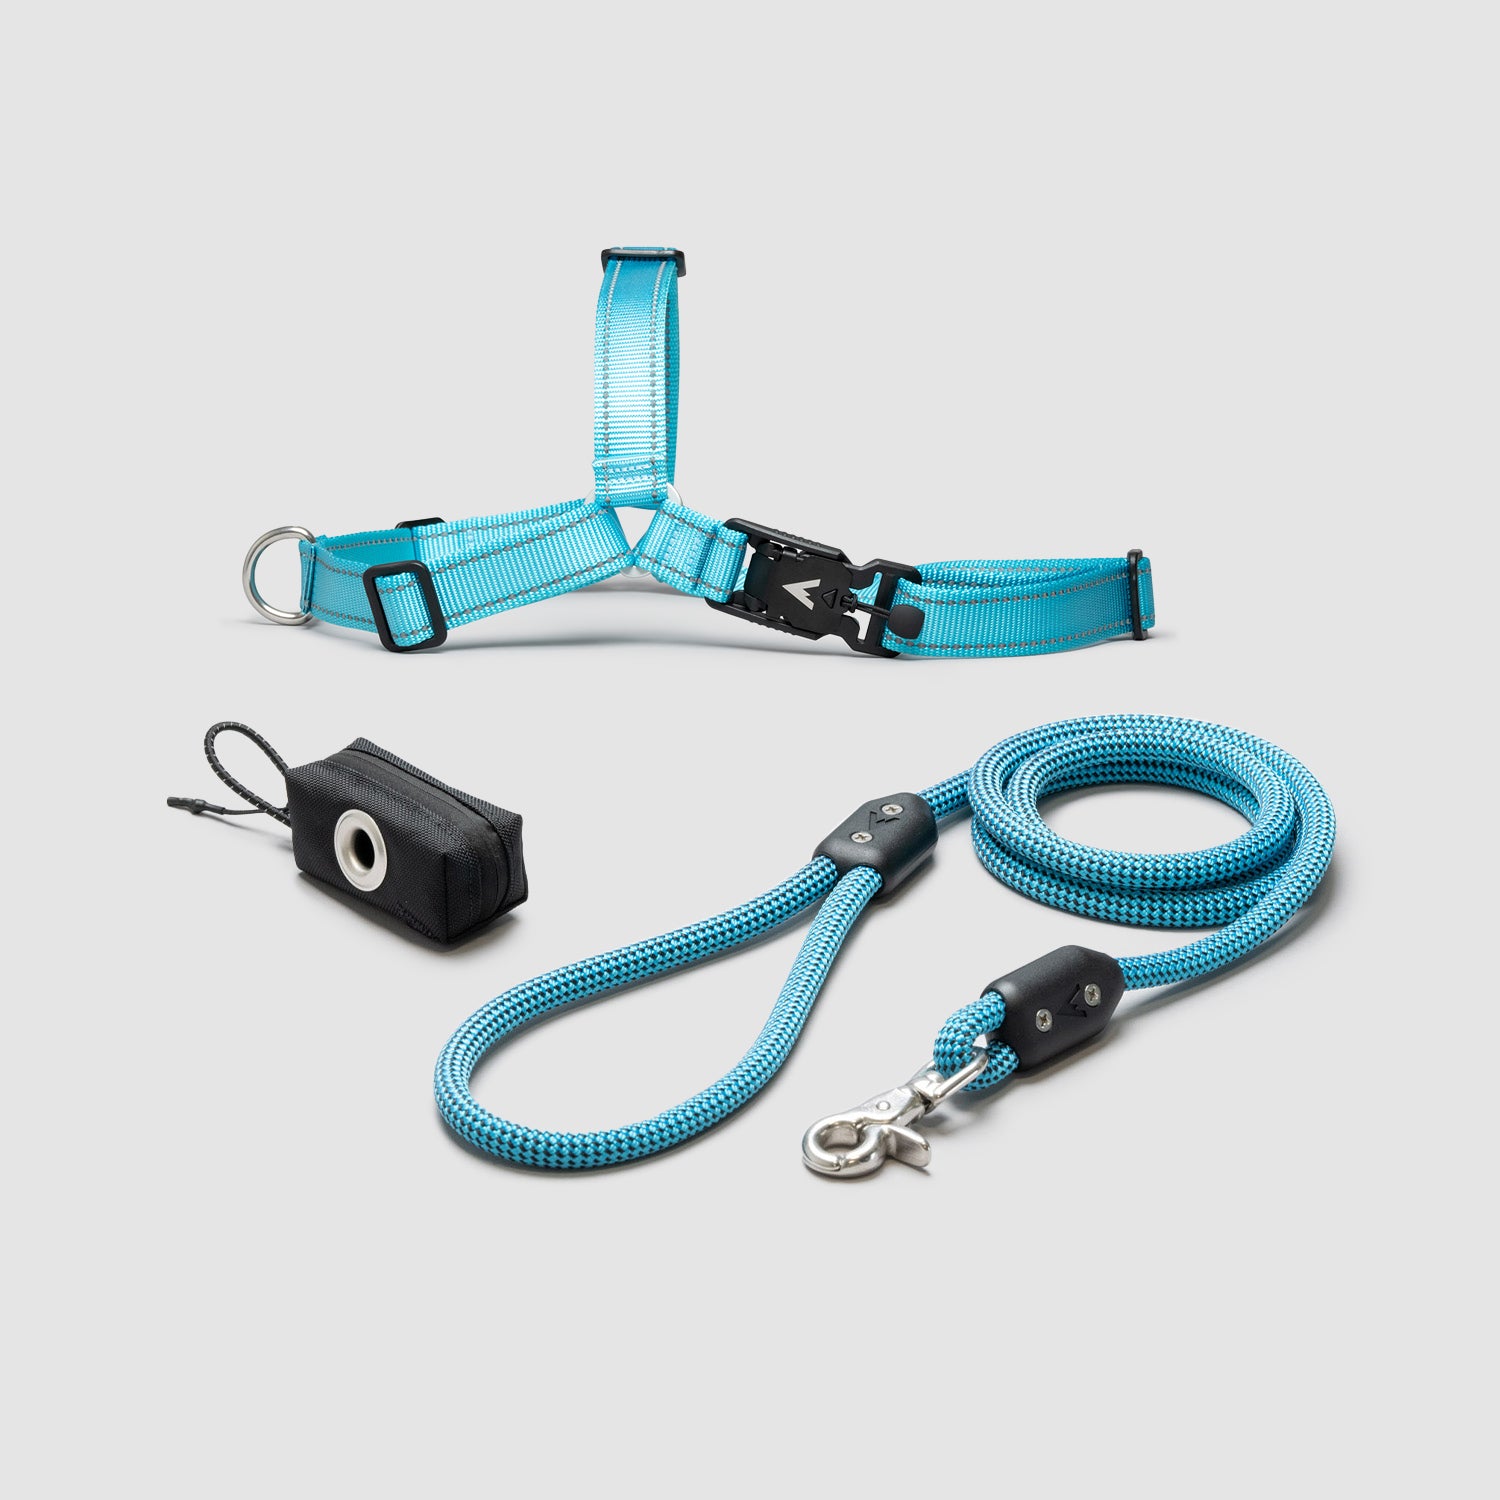 atlas pet company lifetime kit with leash harness and pouch handmade in colorado with lifetime warranty --glacier